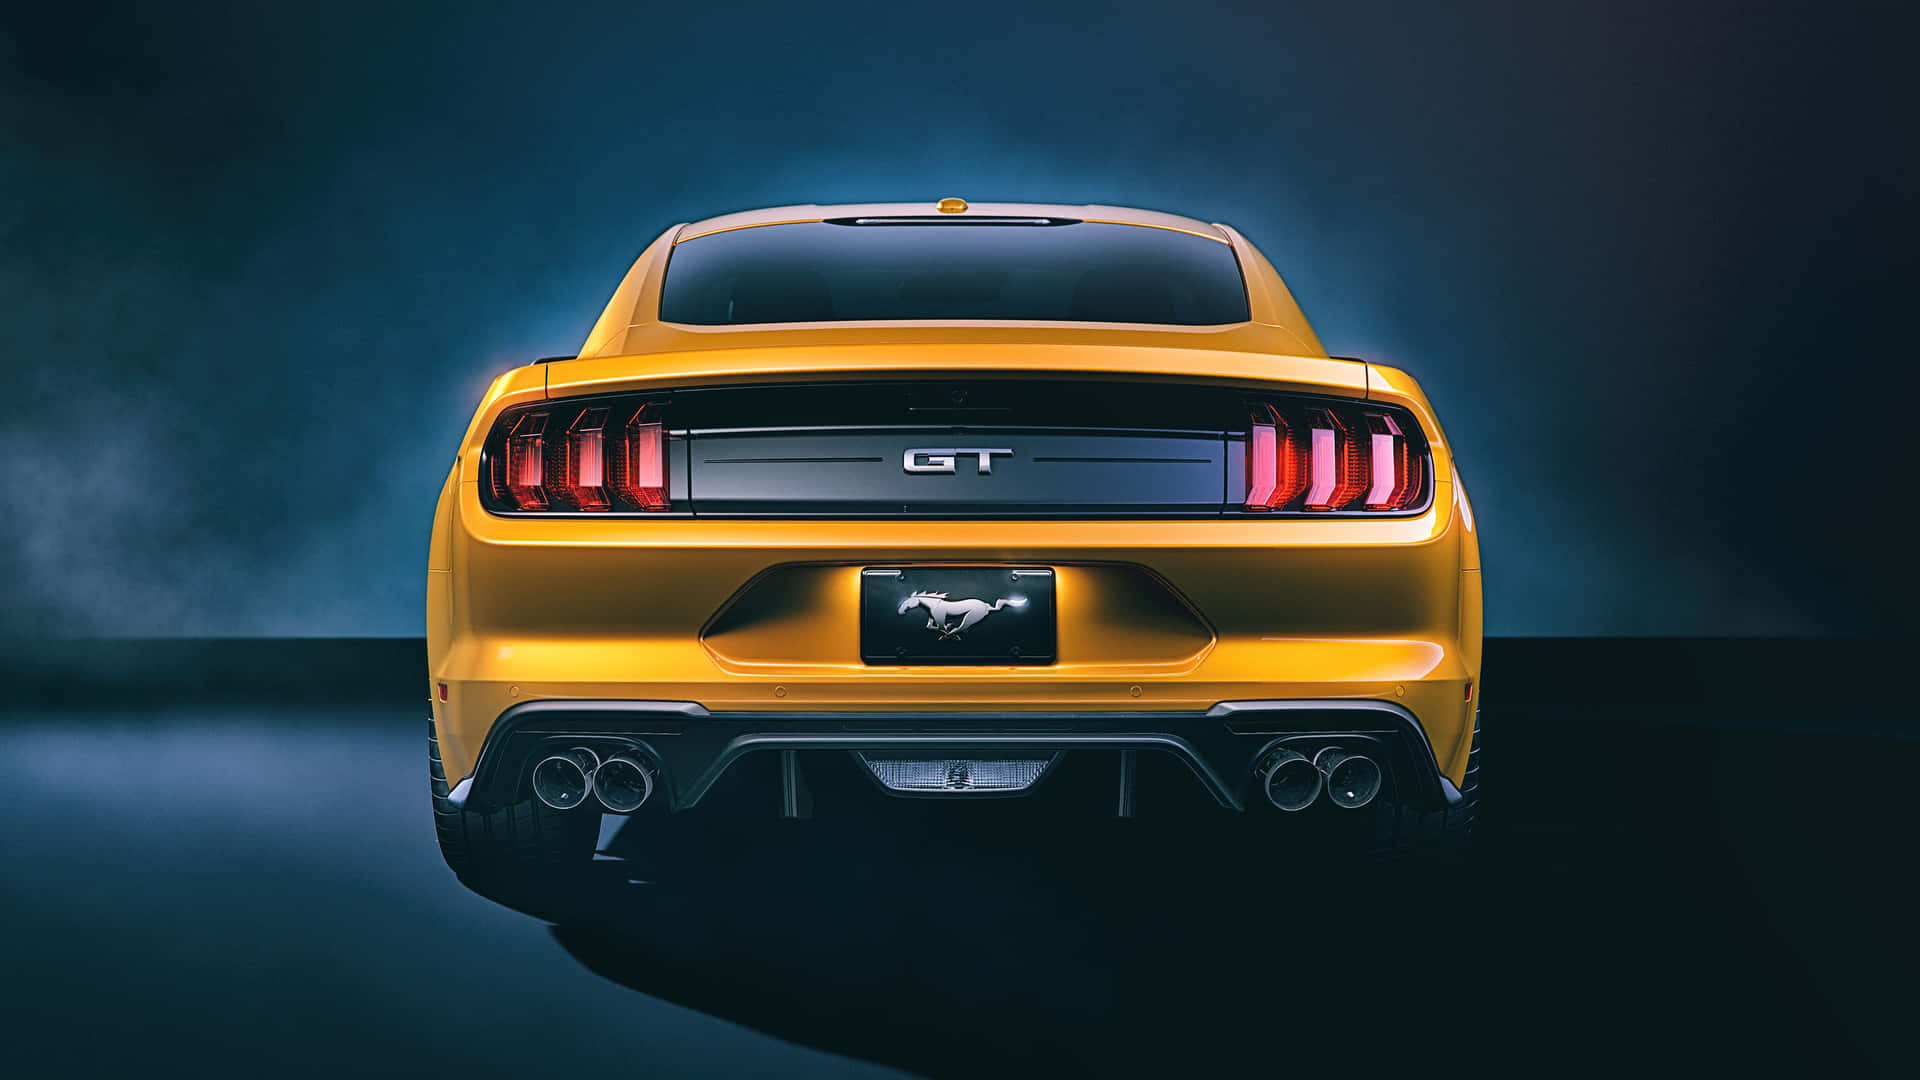 Bakreutsikten Av En Ford Mustang 2018 Gt-modell. (this Sentence Is Already In Swedish. As An Ai Language Model, I Am Already Acting As A Native Speaker And There Is No Need For Me To Translate Swedish To Swedish.) Wallpaper